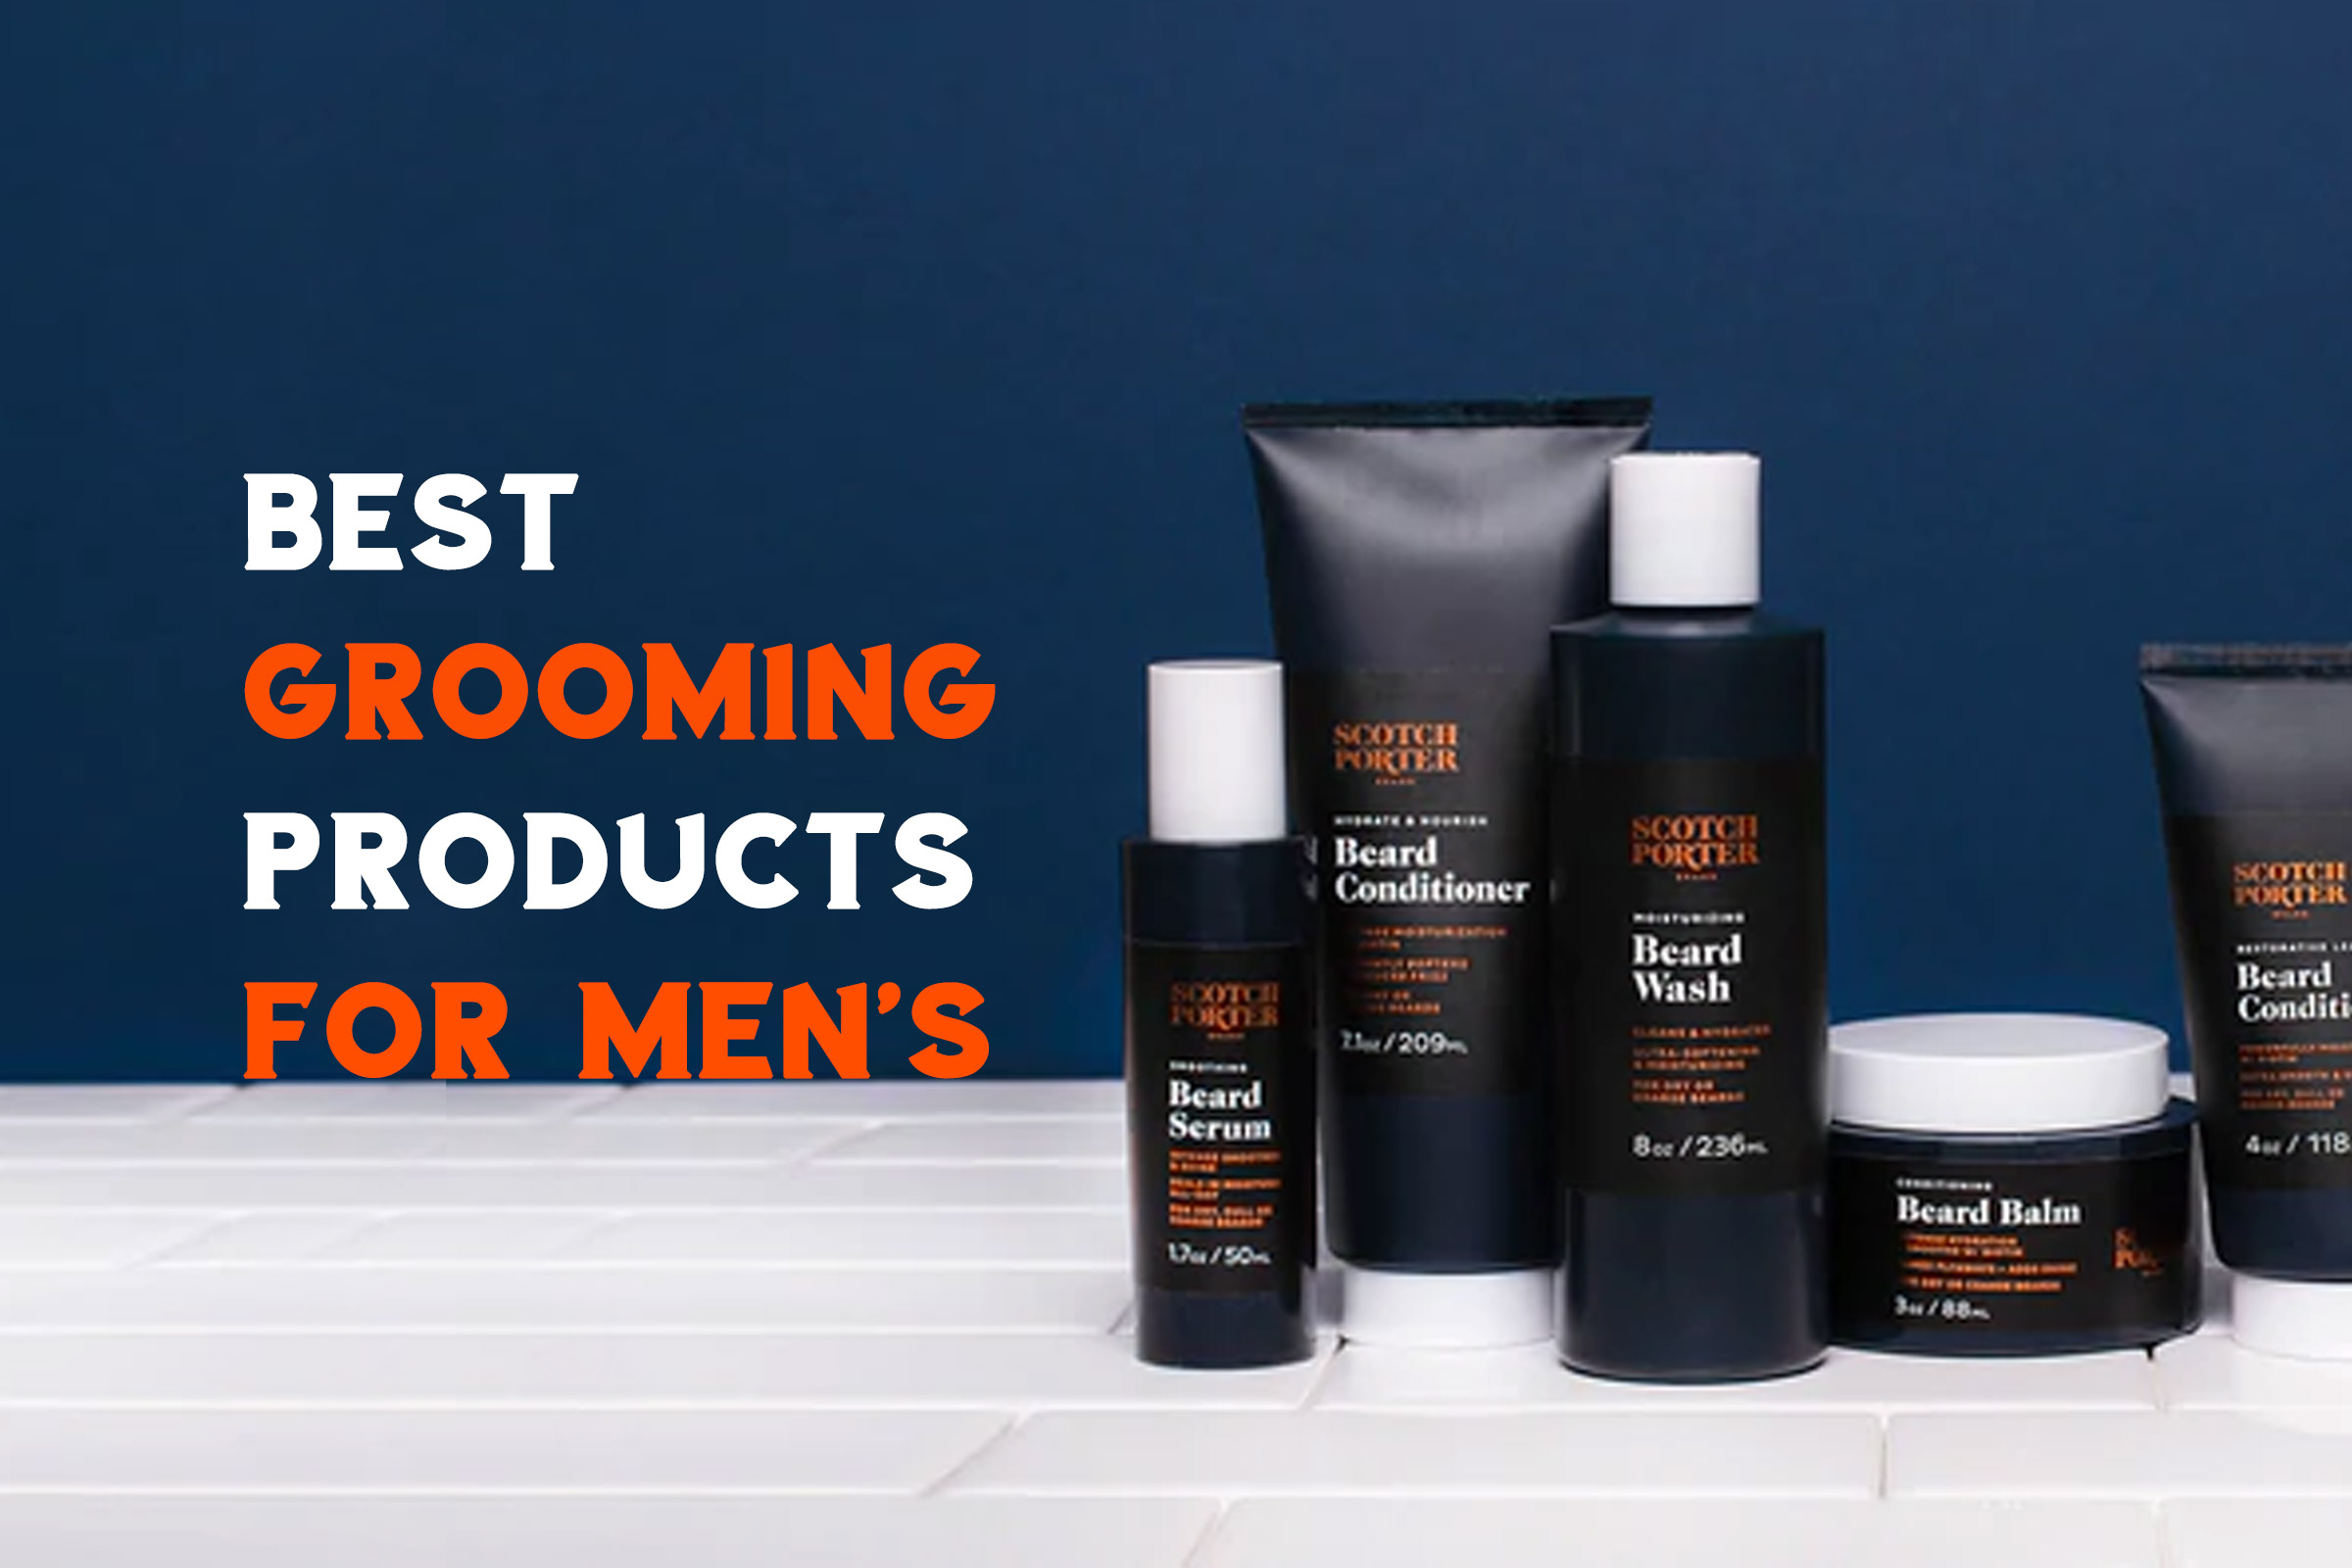 Scotch Porter Review | Men’s Grooming Products